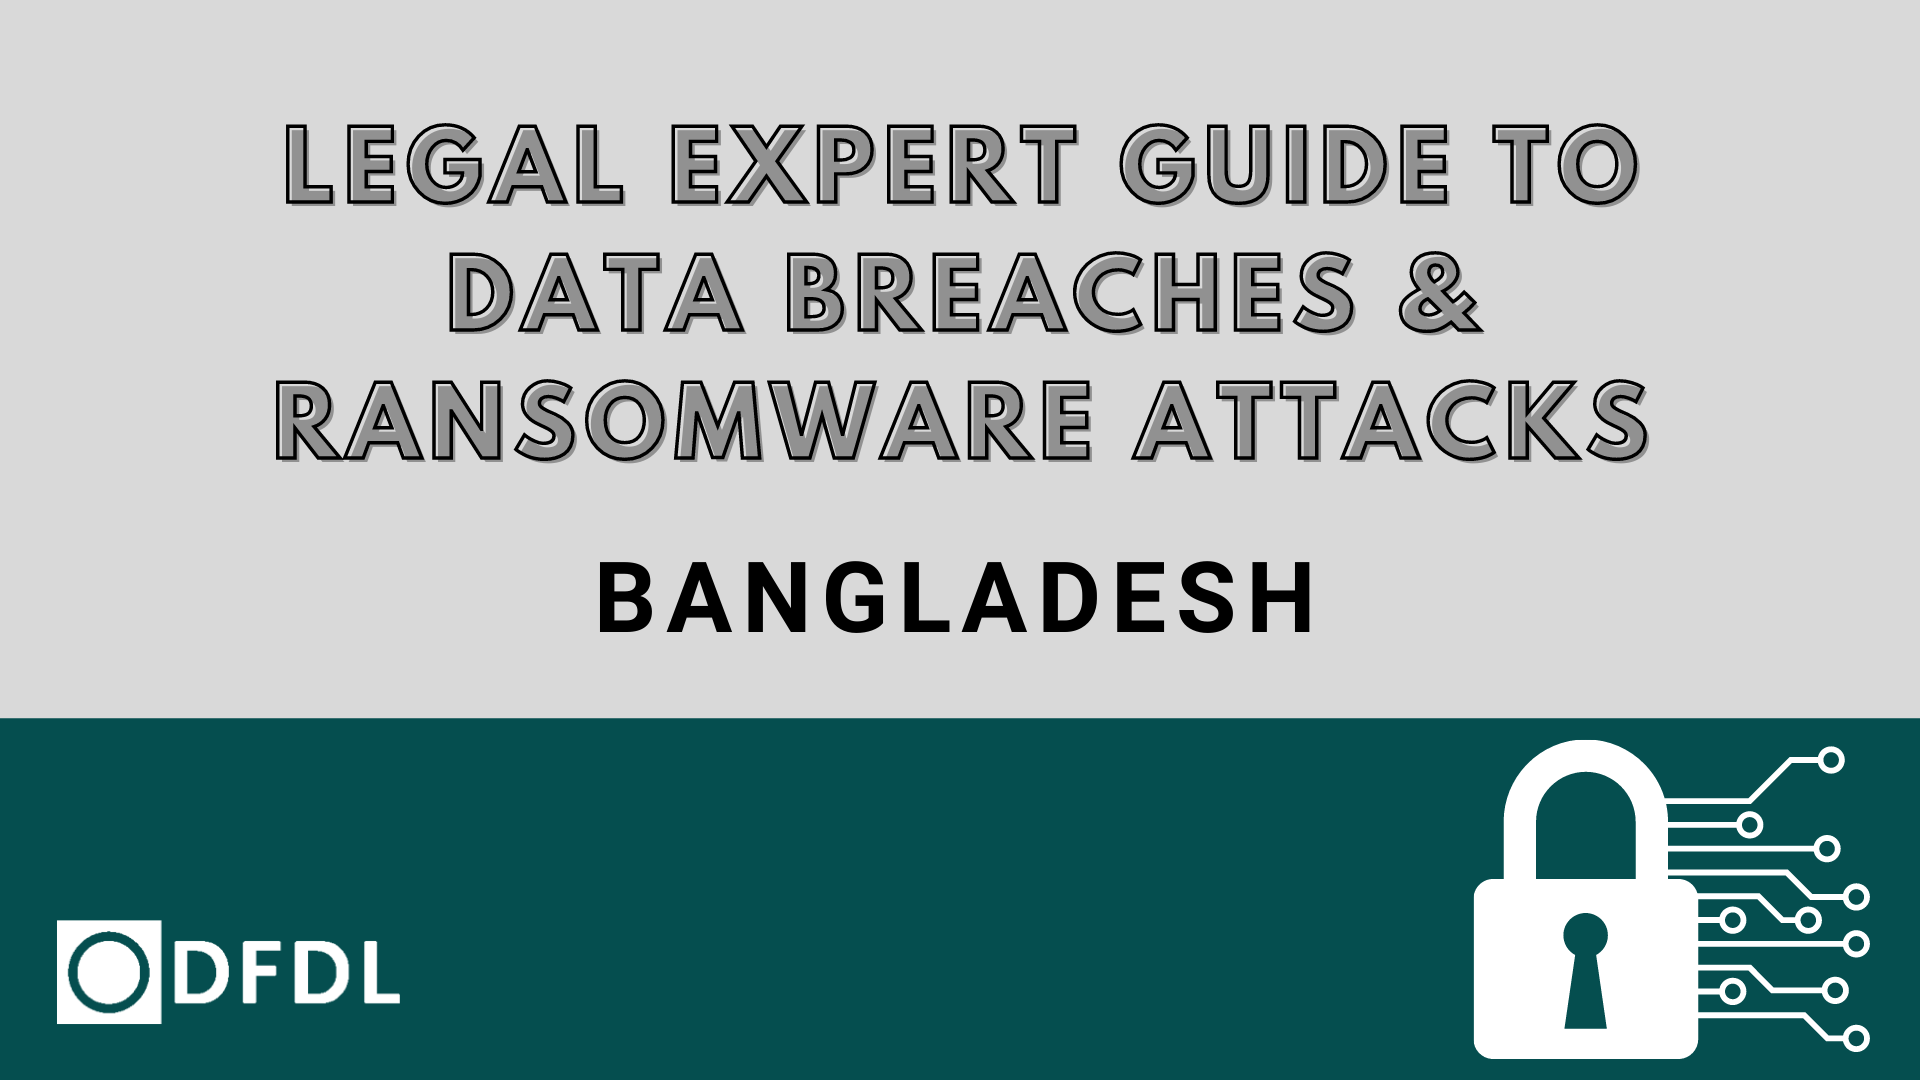 Legal Expert Guide to Data Breaches & Ransomware Attacks in Bangladesh